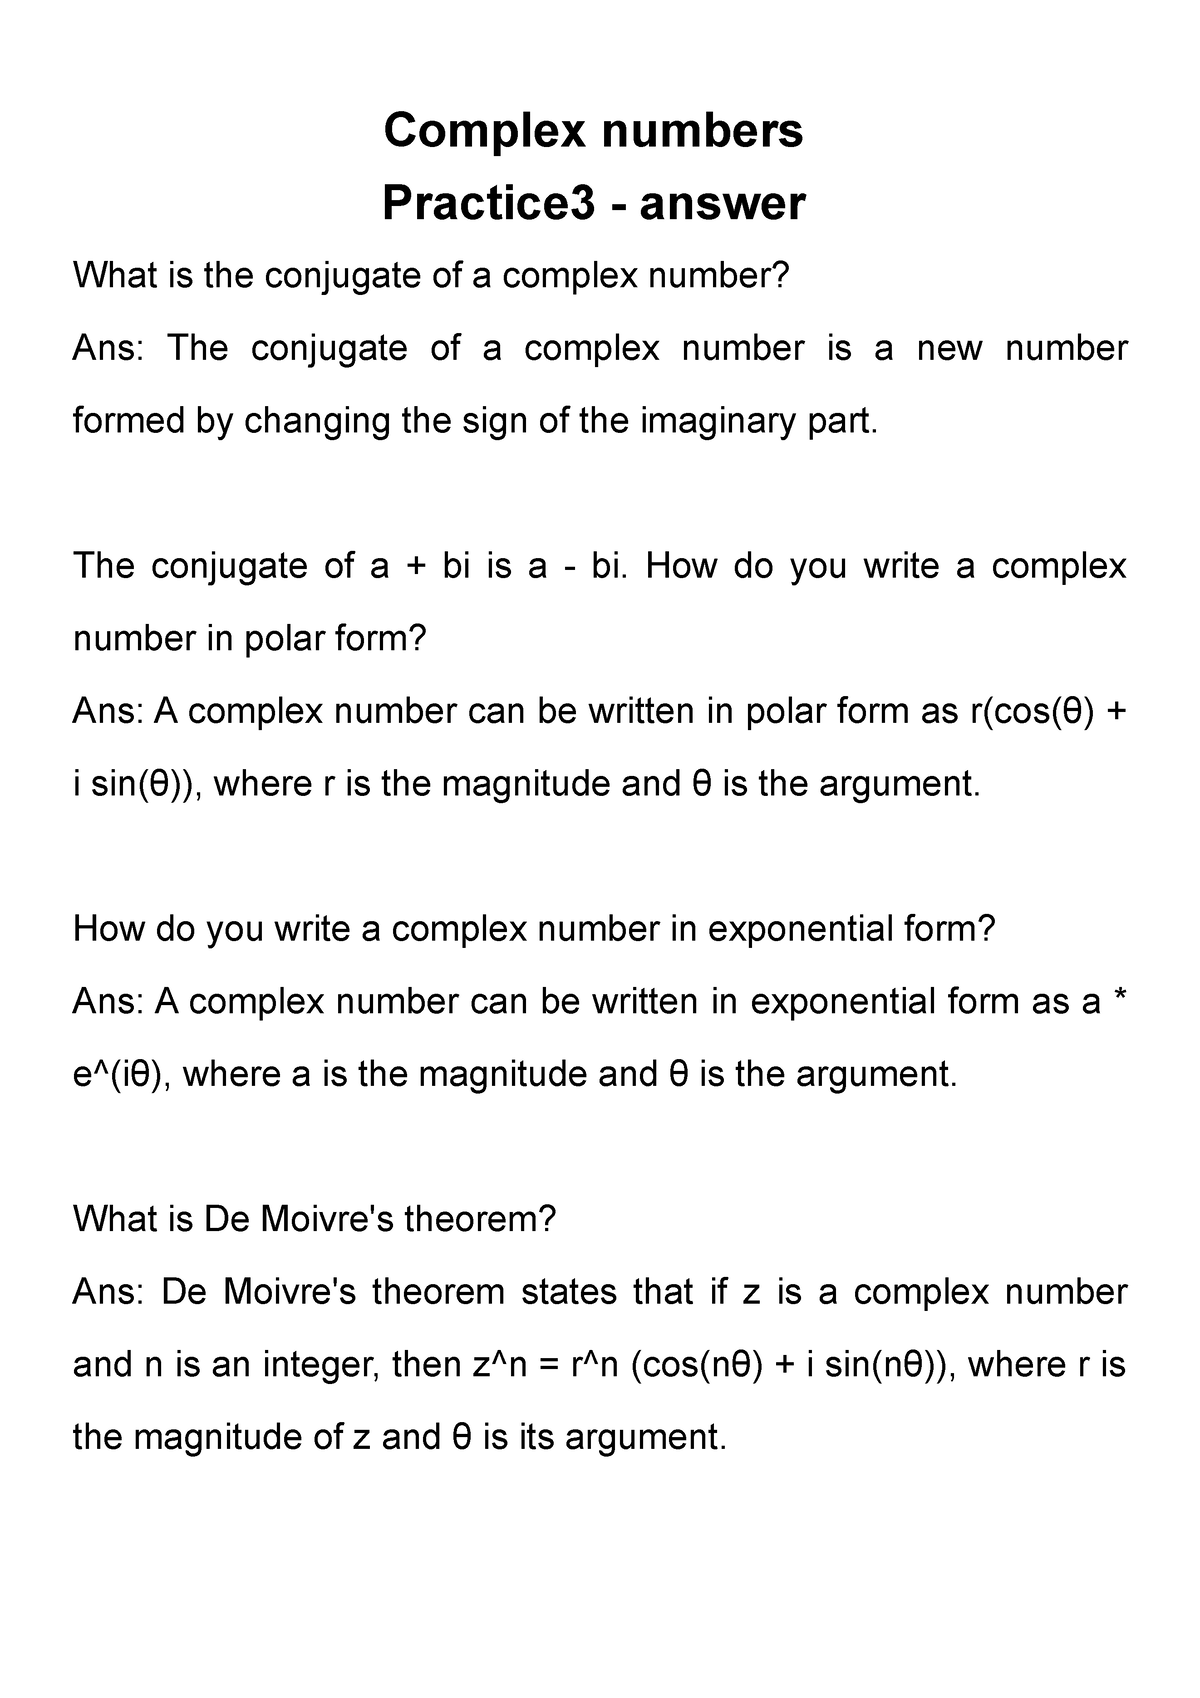 complex-numbers-practice-3-answer-complex-numbers-practice3